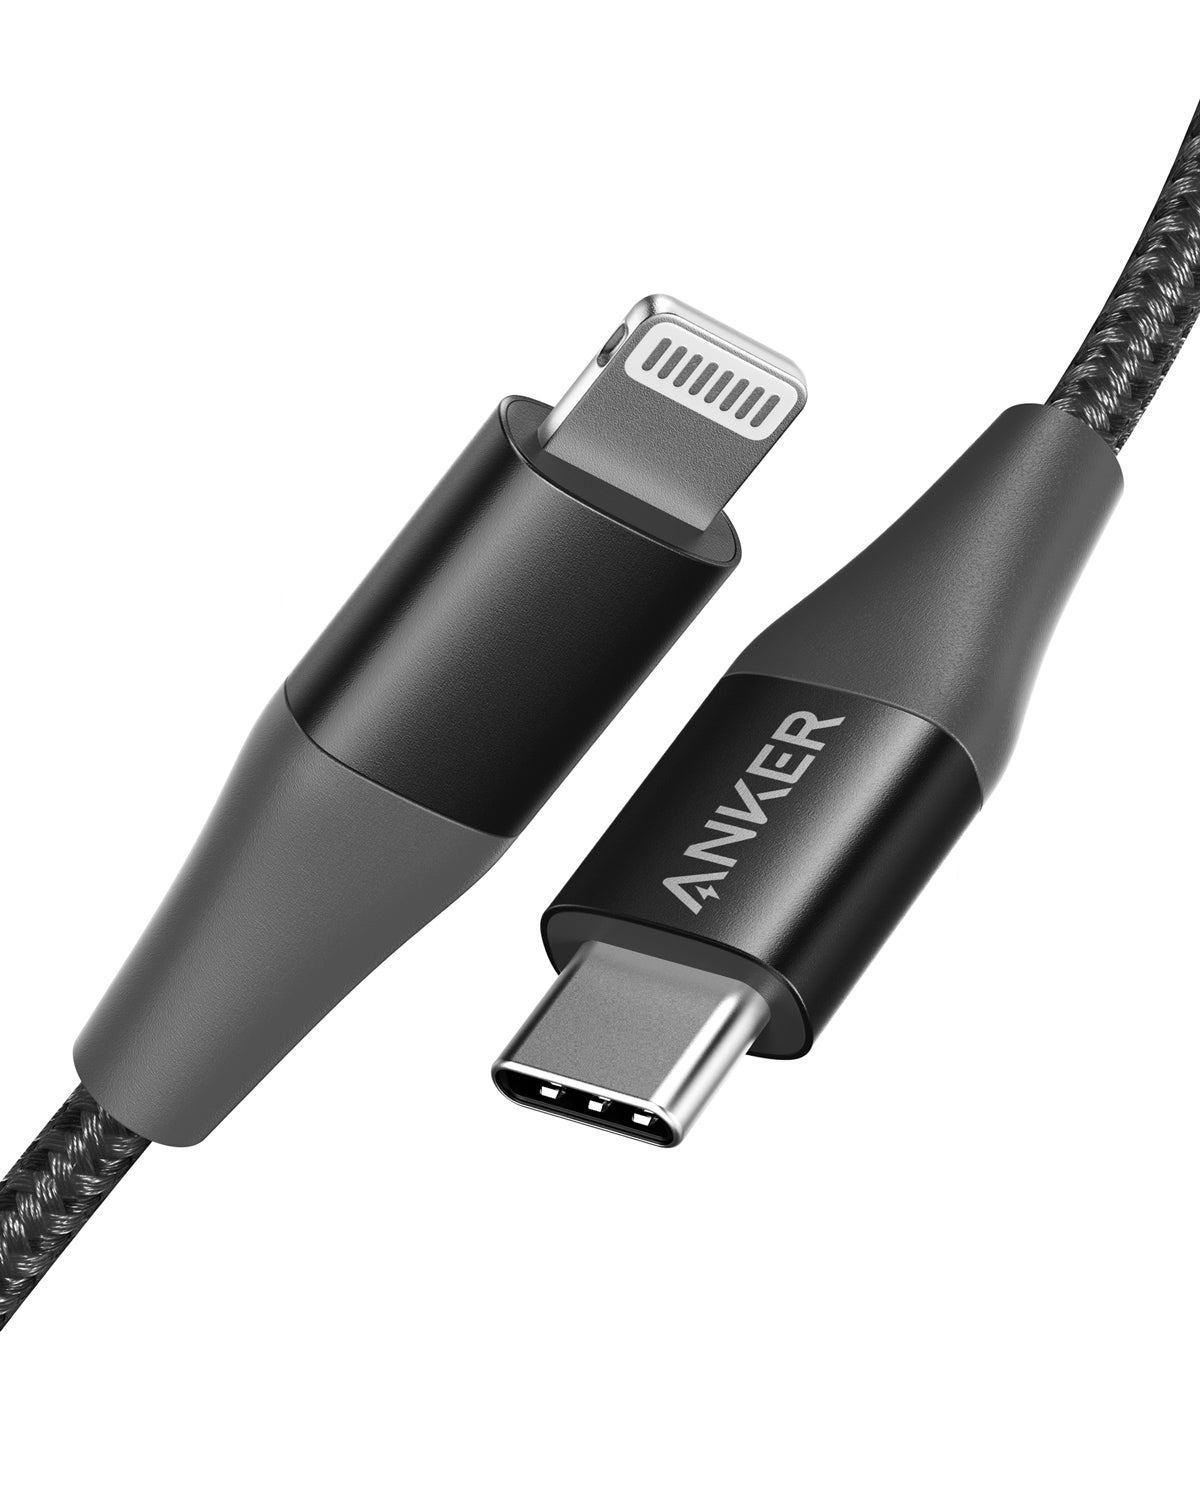 USB C to [ Apple Certified] - Anker